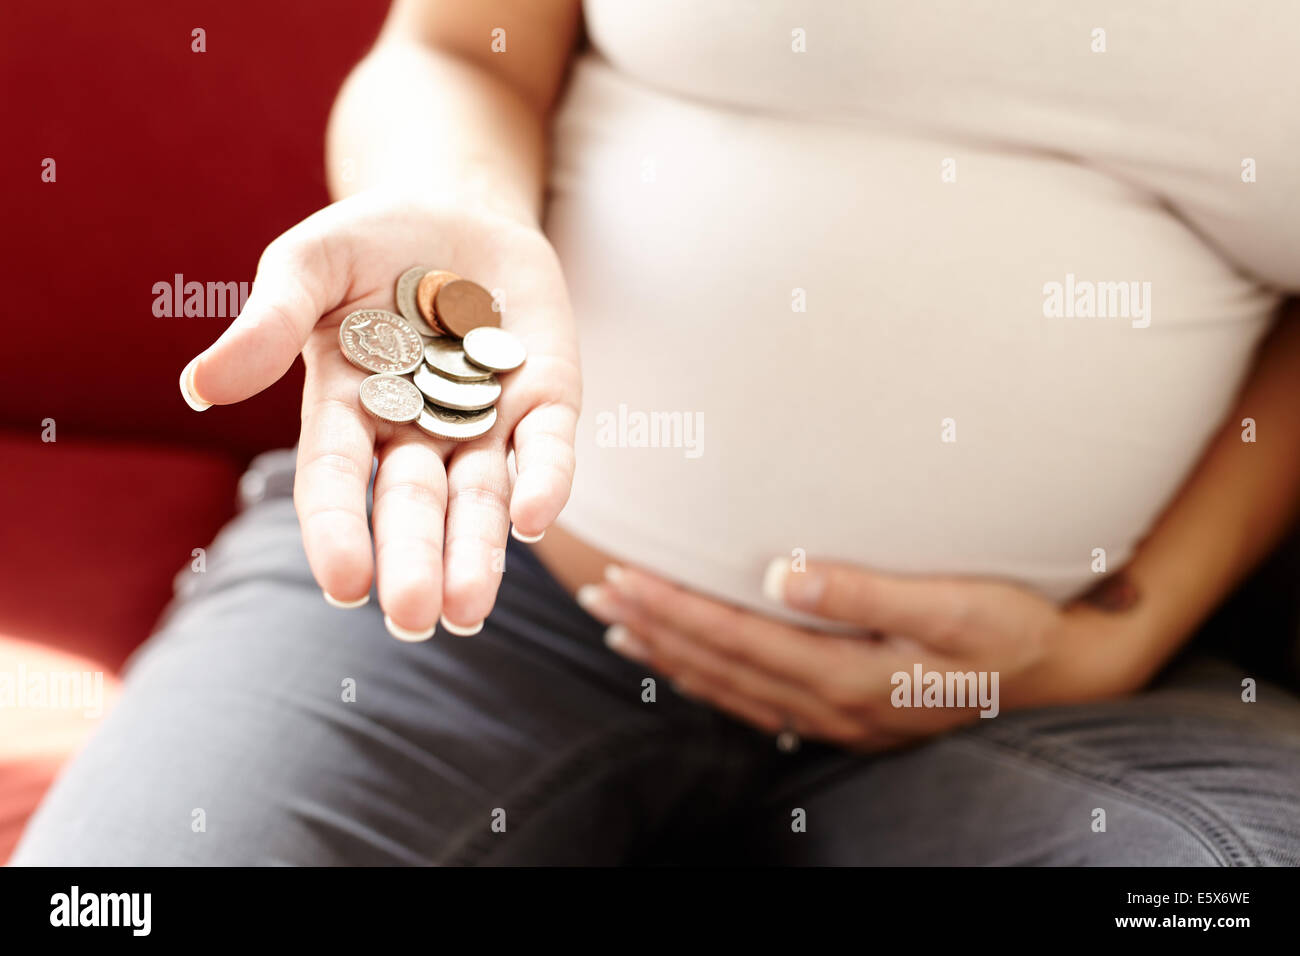 Pregnant woman with money worries Stock Photo